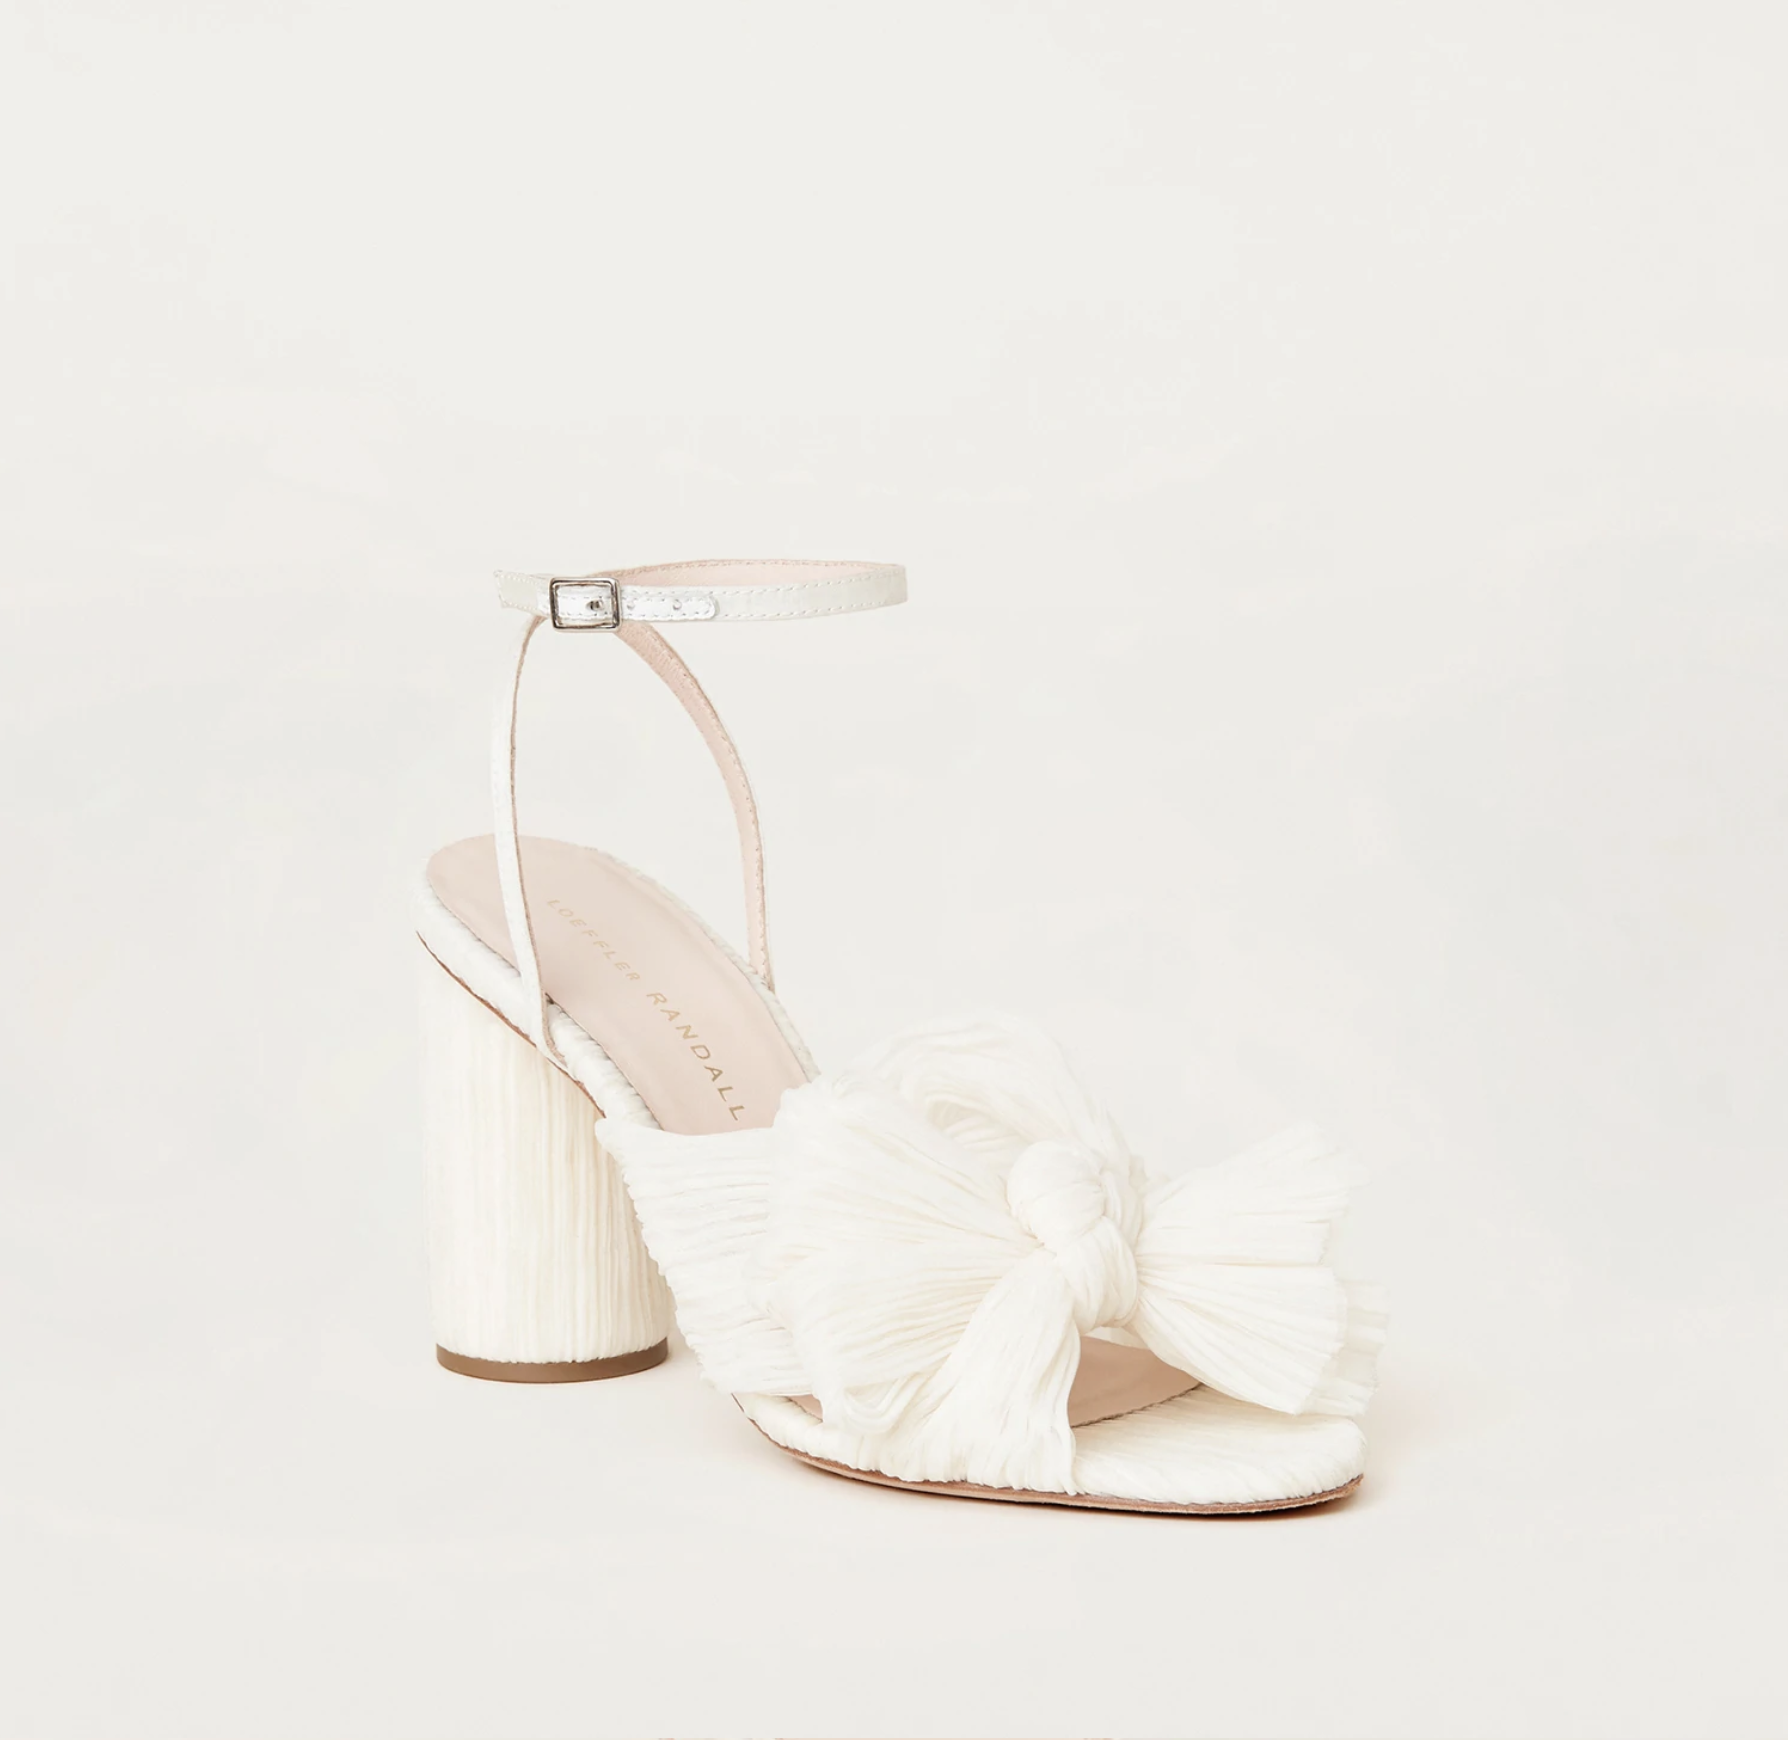 engagement shoes by Loeffler Randall